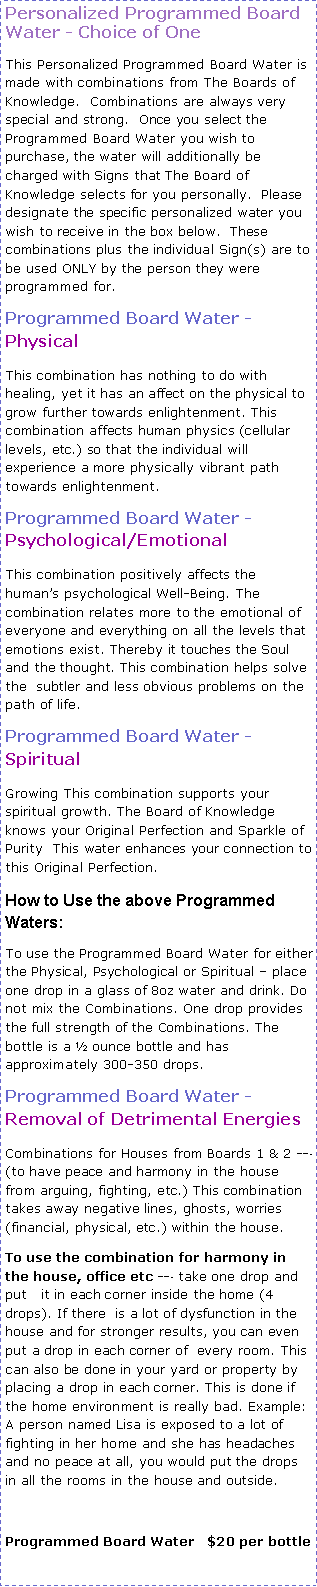 Text Box: Personalized Programmed Board Water - Choice of OneThis Personalized Programmed Board Water is made with combinations from The Boards of Knowledge.  Combinations are always very special and strong.  Once you select the Programmed Board Water you wish to purchase, the water will additionally be charged with Signs that The Board of Knowledge selects for you personally.  Please  designate the specific personalized water you wish to receive in the box below.  These combinations plus the individual Sign(s) are to be used ONLY by the person they were programmed for. Programmed Board Water - Physical This combination has nothing to do with healing, yet it has an affect on the physical to grow further towards enlightenment. This combination affects human physics (cellular levels, etc.) so that the individual will experience a more physically vibrant path towards enlightenment. Programmed Board Water - Psychological/Emotional This combination positively affects the humans psychological Well-Being. The combination relates more to the emotional of everyone and everything on all the levels that emotions exist. Thereby it touches the Soul and the thought. This combination helps solve the  subtler and less obvious problems on the path of life. Programmed Board Water - SpiritualGrowing This combination supports your spiritual growth. The Board of Knowledge knows your Original Perfection and Sparkle of Purity  This water enhances your connection to this Original Perfection.  How to Use the above Programmed Waters: To use the Programmed Board Water for either the Physical, Psychological or Spiritual  place one drop in a glass of 8oz water and drink. Do not mix the Combinations. One drop provides the full strength of the Combinations. The bottle is a  ounce bottle and has approximately 300-350 drops.   Programmed Board Water - Removal of Detrimental EnergiesCombinations for Houses from Boards 1 & 2 --‐ (to have peace and harmony in the house from arguing, fighting, etc.) This combination takes away negative lines, ghosts, worries (financial, physical, etc.) within the house. To use the combination for harmony in the house, office etc --‐ take one drop and put   it in each corner inside the home (4 drops). If there  is a lot of dysfunction in the house and for stronger results, you can even put a drop in each corner of  every room. This can also be done in your yard or property by placing a drop in each corner. This is done if the home environment is really bad. Example: A person named Lisa is exposed to a lot of fighting in her home and she has headaches and no peace at all, you would put the drops in all the rooms in the house and outside.  Programmed Board Water   $20 per bottle